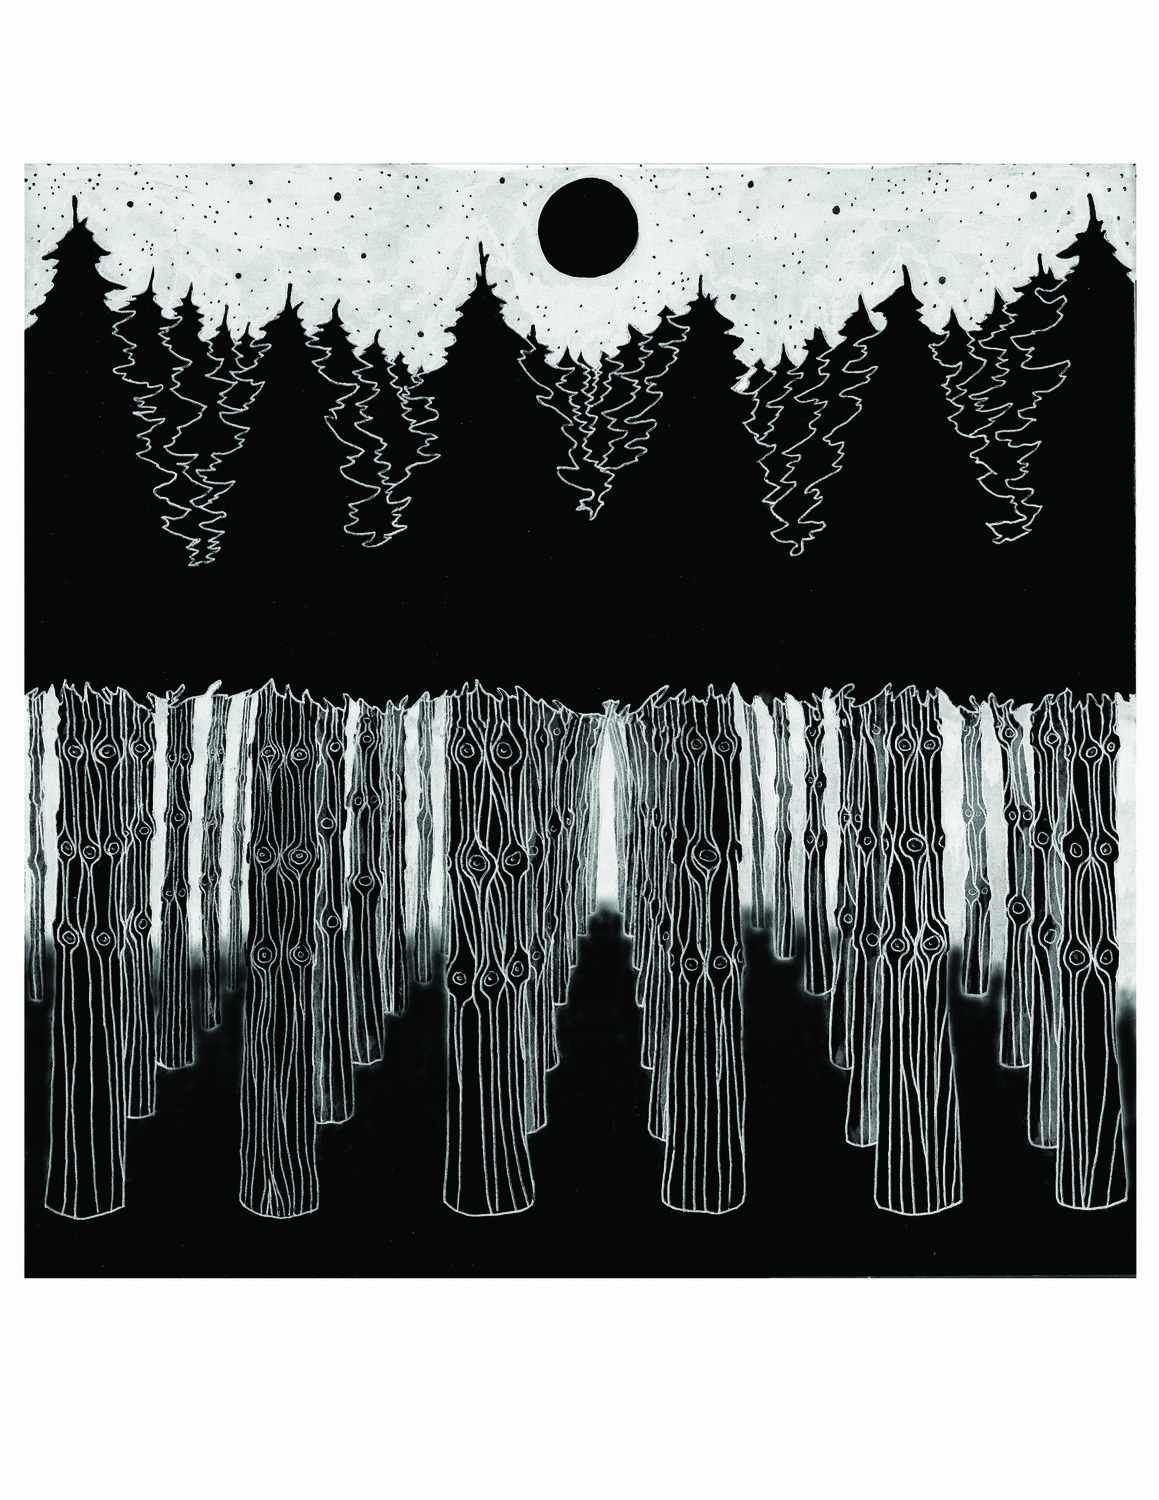 Silent Pines (Inverted)